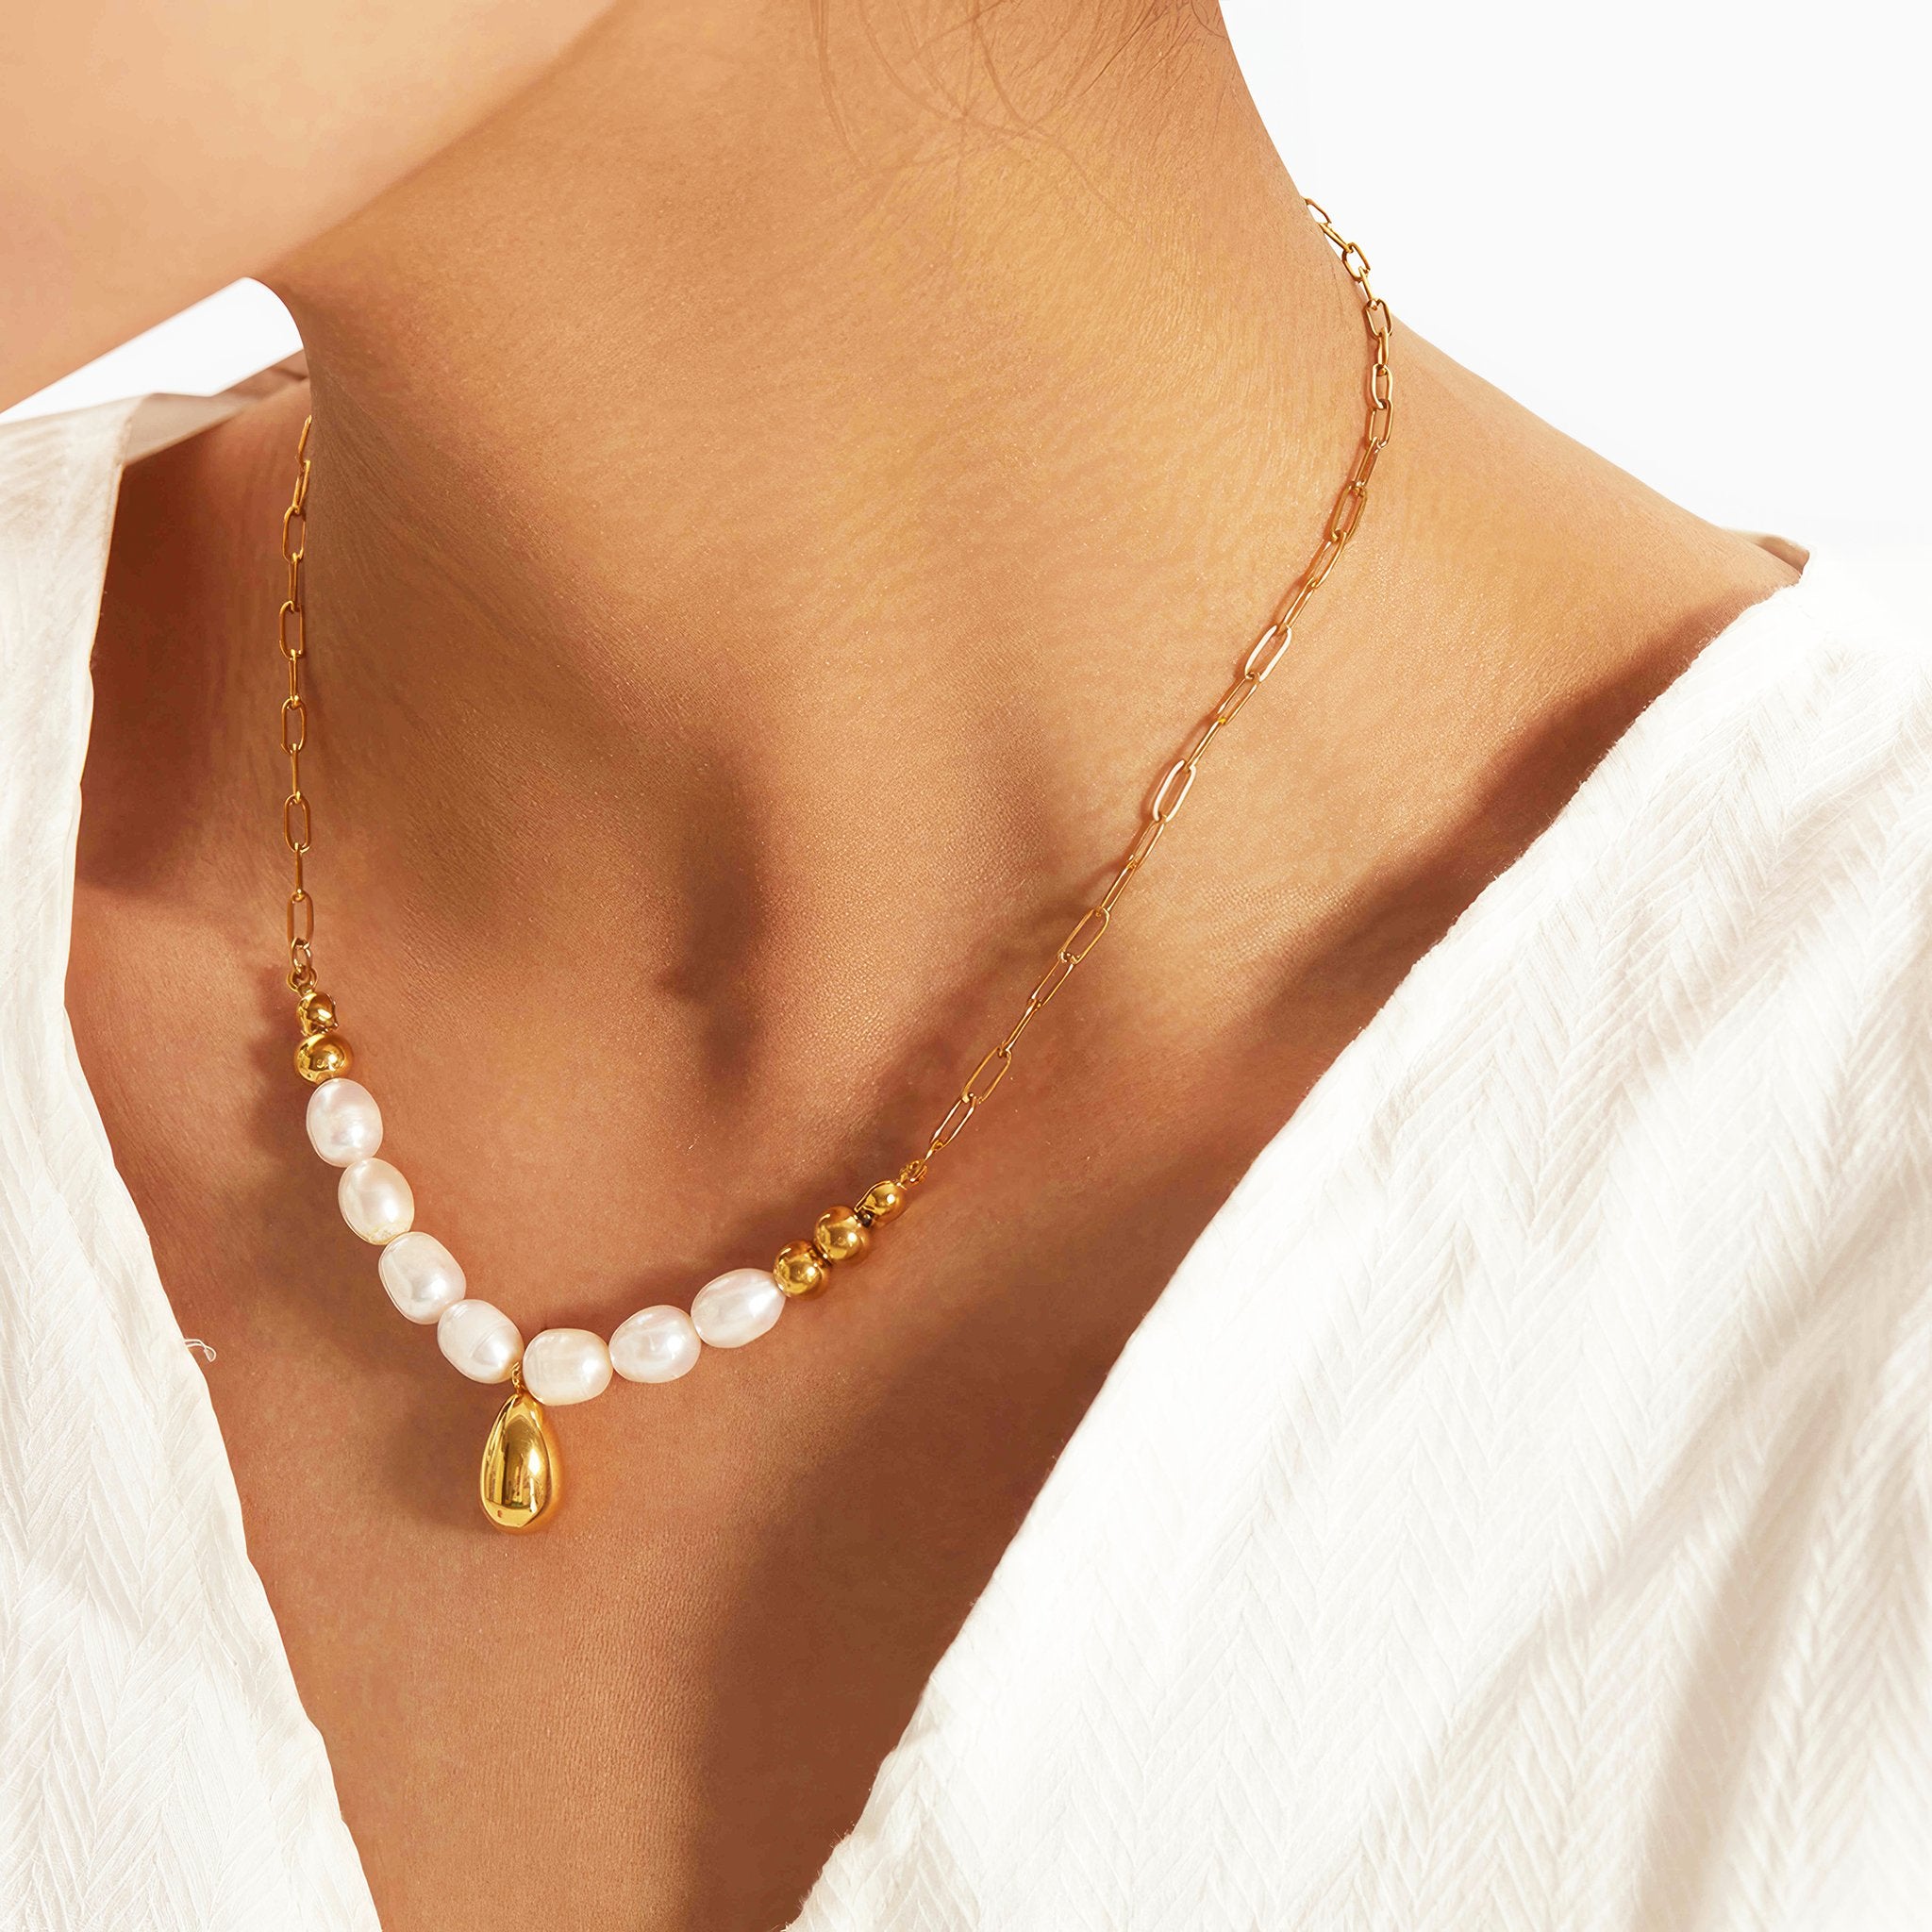 Baroque Freshwater Pearl Necklace - Nobbier - Necklace - 18K Gold And Titanium PVD Coated Jewelry